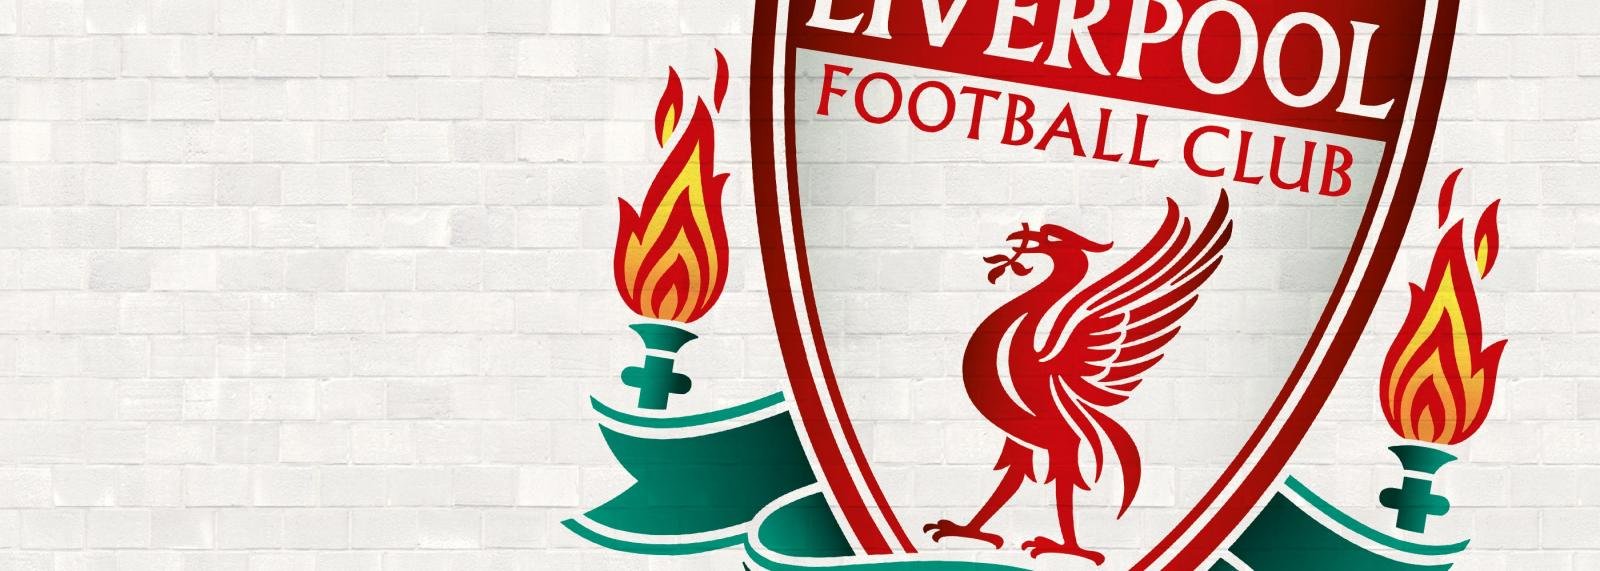 Liverpool agree deal for midfielder